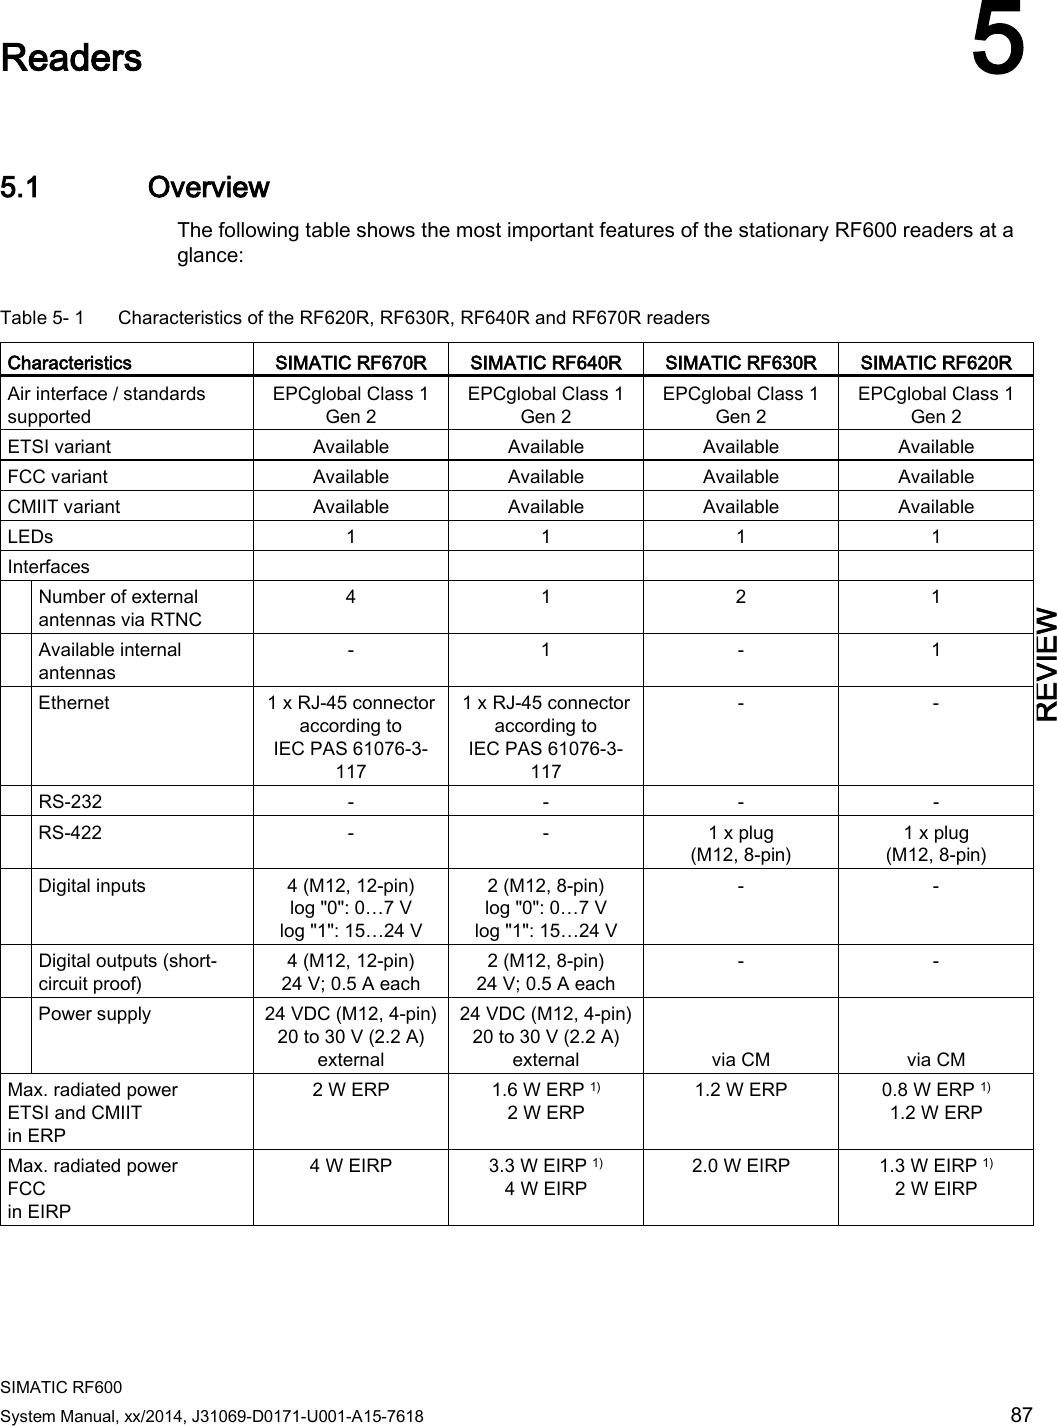  SIMATIC RF600 System Manual, xx/2014, J31069-D0171-U001-A15-7618 87 REVIEW  Readers 5 5.1 Overview The following table shows the most important features of the stationary RF600 readers at a glance: Table 5- 1  Characteristics of the RF620R, RF630R, RF640R and RF670R readers Characteristics SIMATIC RF670R SIMATIC RF640R SIMATIC RF630R SIMATIC RF620R Air interface / standards supported EPCglobal Class 1 Gen 2 EPCglobal Class 1 Gen 2 EPCglobal Class 1 Gen 2 EPCglobal Class 1 Gen 2 ETSI variant Available Available Available Available FCC variant Available Available Available Available CMIIT variant Available Available Available Available LEDs 1 1 1 1 Interfaces      Number of external antennas via RTNC 4  1  2  1  Available internal antennas -  1  -  1  Ethernet 1 x RJ-45 connector according to IEC PAS 61076-3-117 1 x RJ-45 connector according to IEC PAS 61076-3-117 -  -  RS-232 - - - -  RS-422  -  -  1 x plug  (M12, 8-pin) 1 x plug  (M12, 8-pin)  Digital inputs 4 (M12, 12-pin) log &quot;0&quot;: 0…7 V log &quot;1&quot;: 15…24 V 2 (M12, 8-pin) log &quot;0&quot;: 0…7 V log &quot;1&quot;: 15…24 V -  -  Digital outputs (short-circuit proof) 4 (M12, 12-pin) 24 V; 0.5 A each 2 (M12, 8-pin) 24 V; 0.5 A each -  -  Power supply 24 VDC (M12, 4-pin)  20 to 30 V (2.2 A) external 24 VDC (M12, 4-pin)  20 to 30 V (2.2 A) external   via CM   via CM Max. radiated power  ETSI and CMIIT  in ERP 2 W ERP 1.6 W ERP 1) 2 W ERP 1.2 W ERP 0.8 W ERP 1) 1.2 W ERP Max. radiated power  FCC in EIRP 4 W EIRP 3.3 W EIRP 1) 4 W EIRP 2.0 W EIRP 1.3 W EIRP 1) 2 W EIRP 